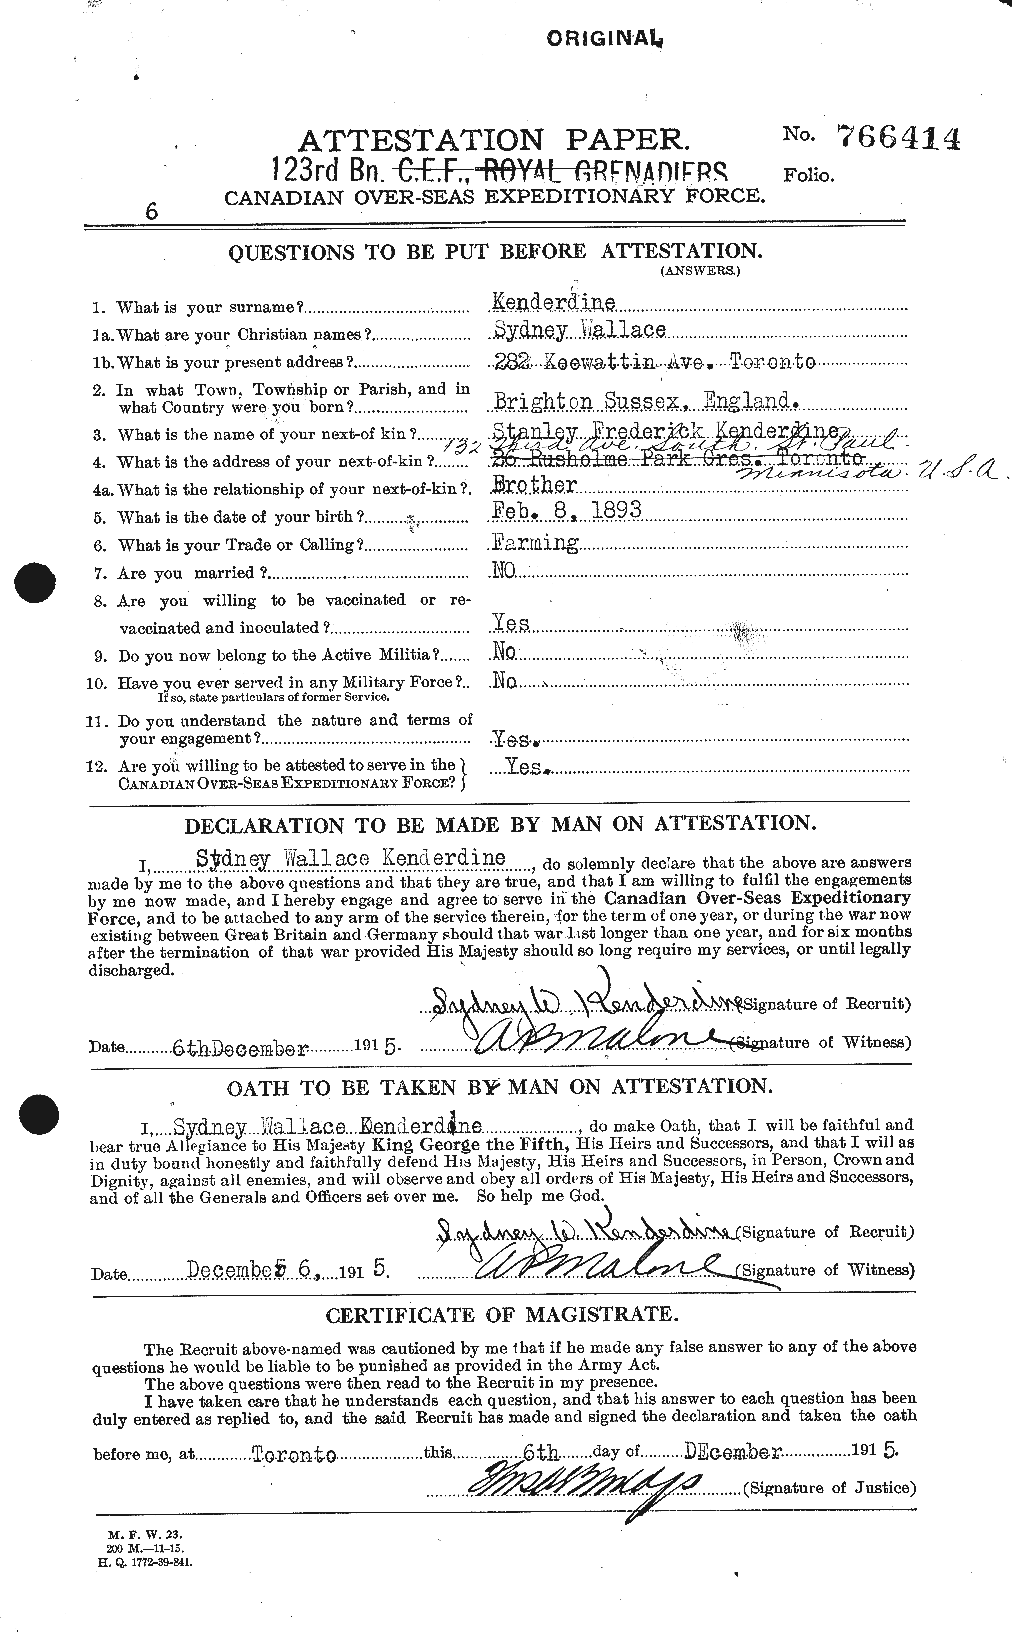 Personnel Records of the First World War - CEF 435623a